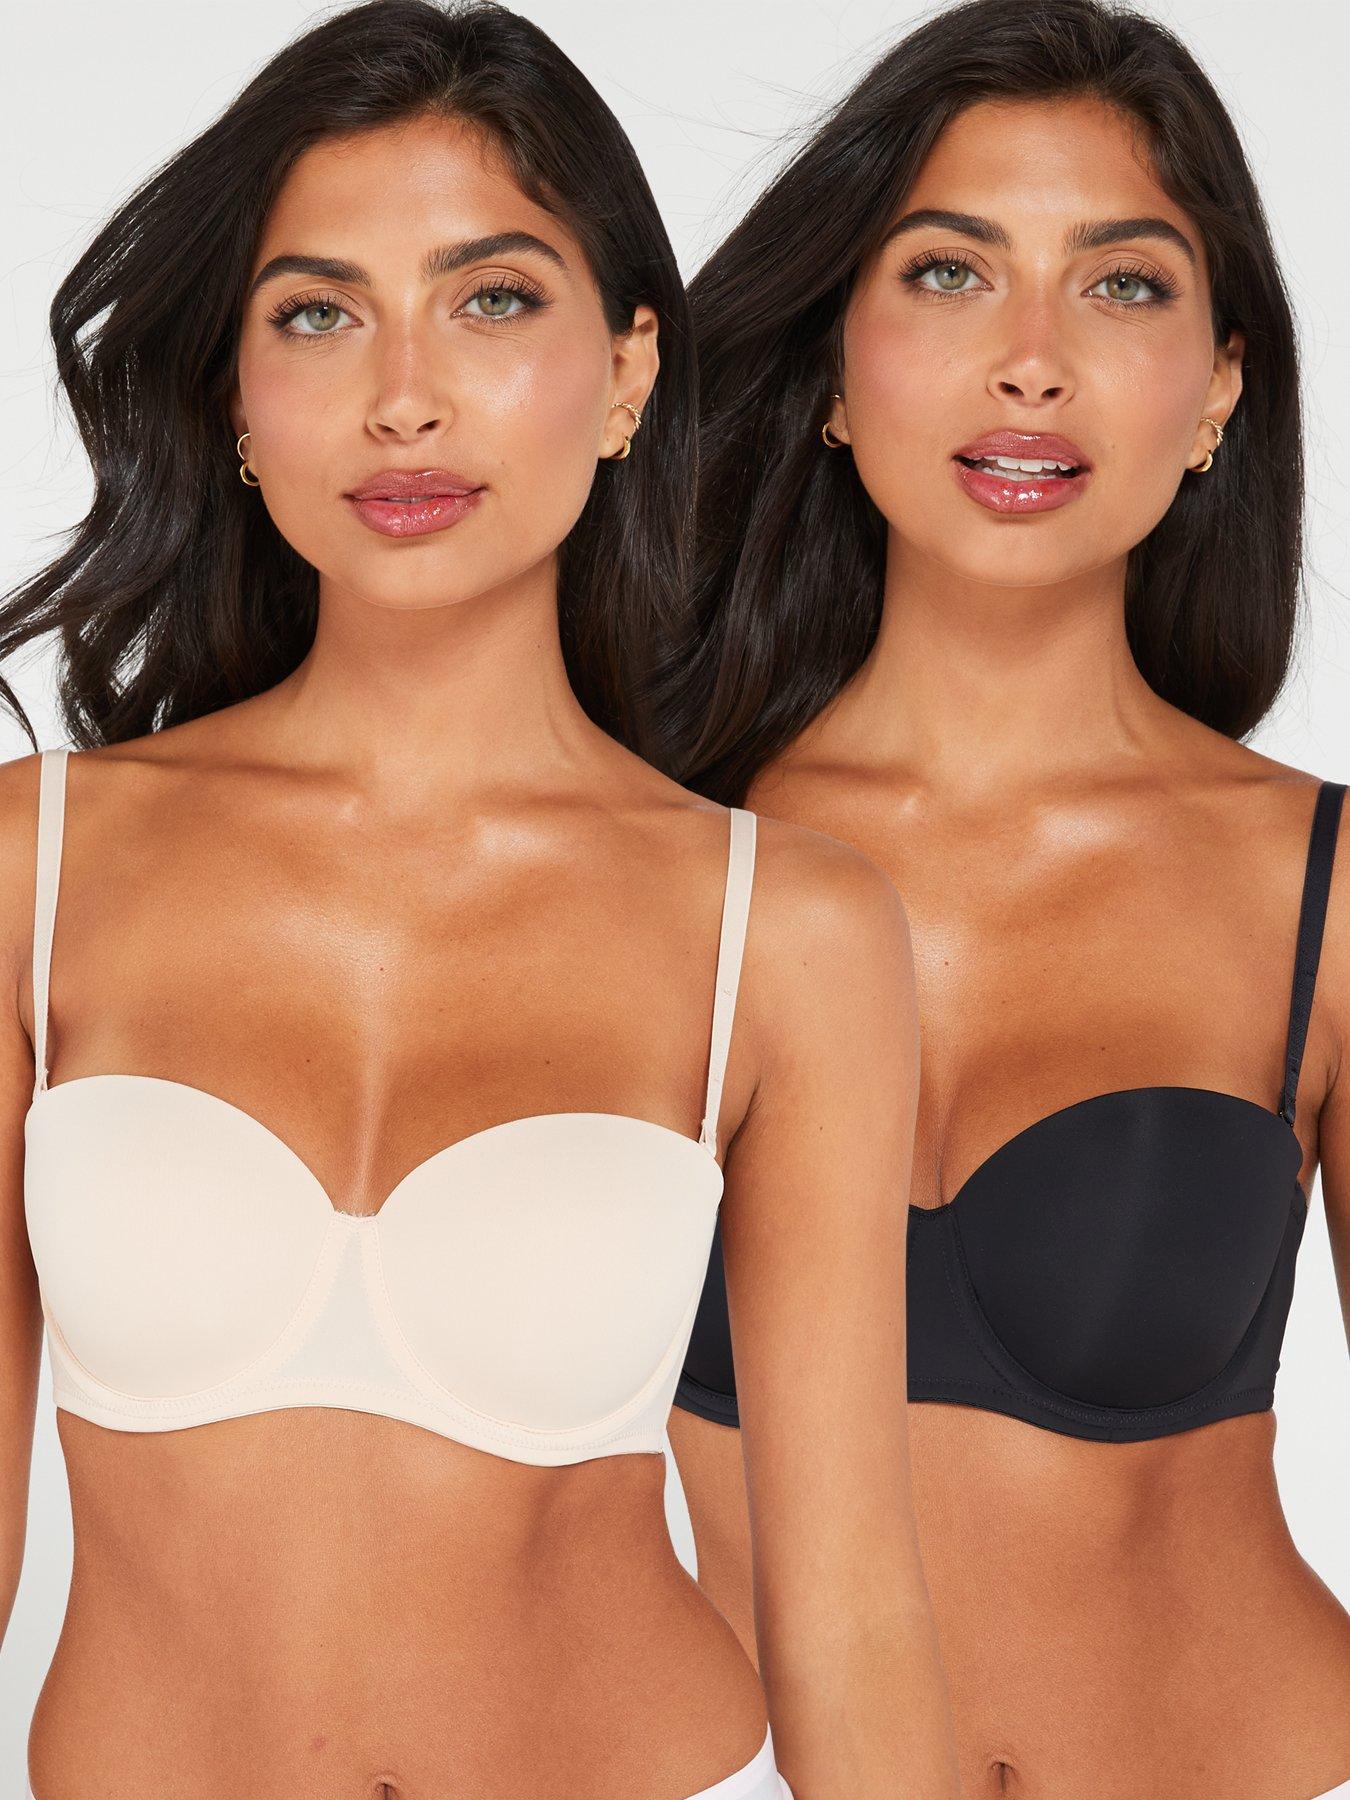 New Look 2 Pack Tan Bow Front Strapless Bras